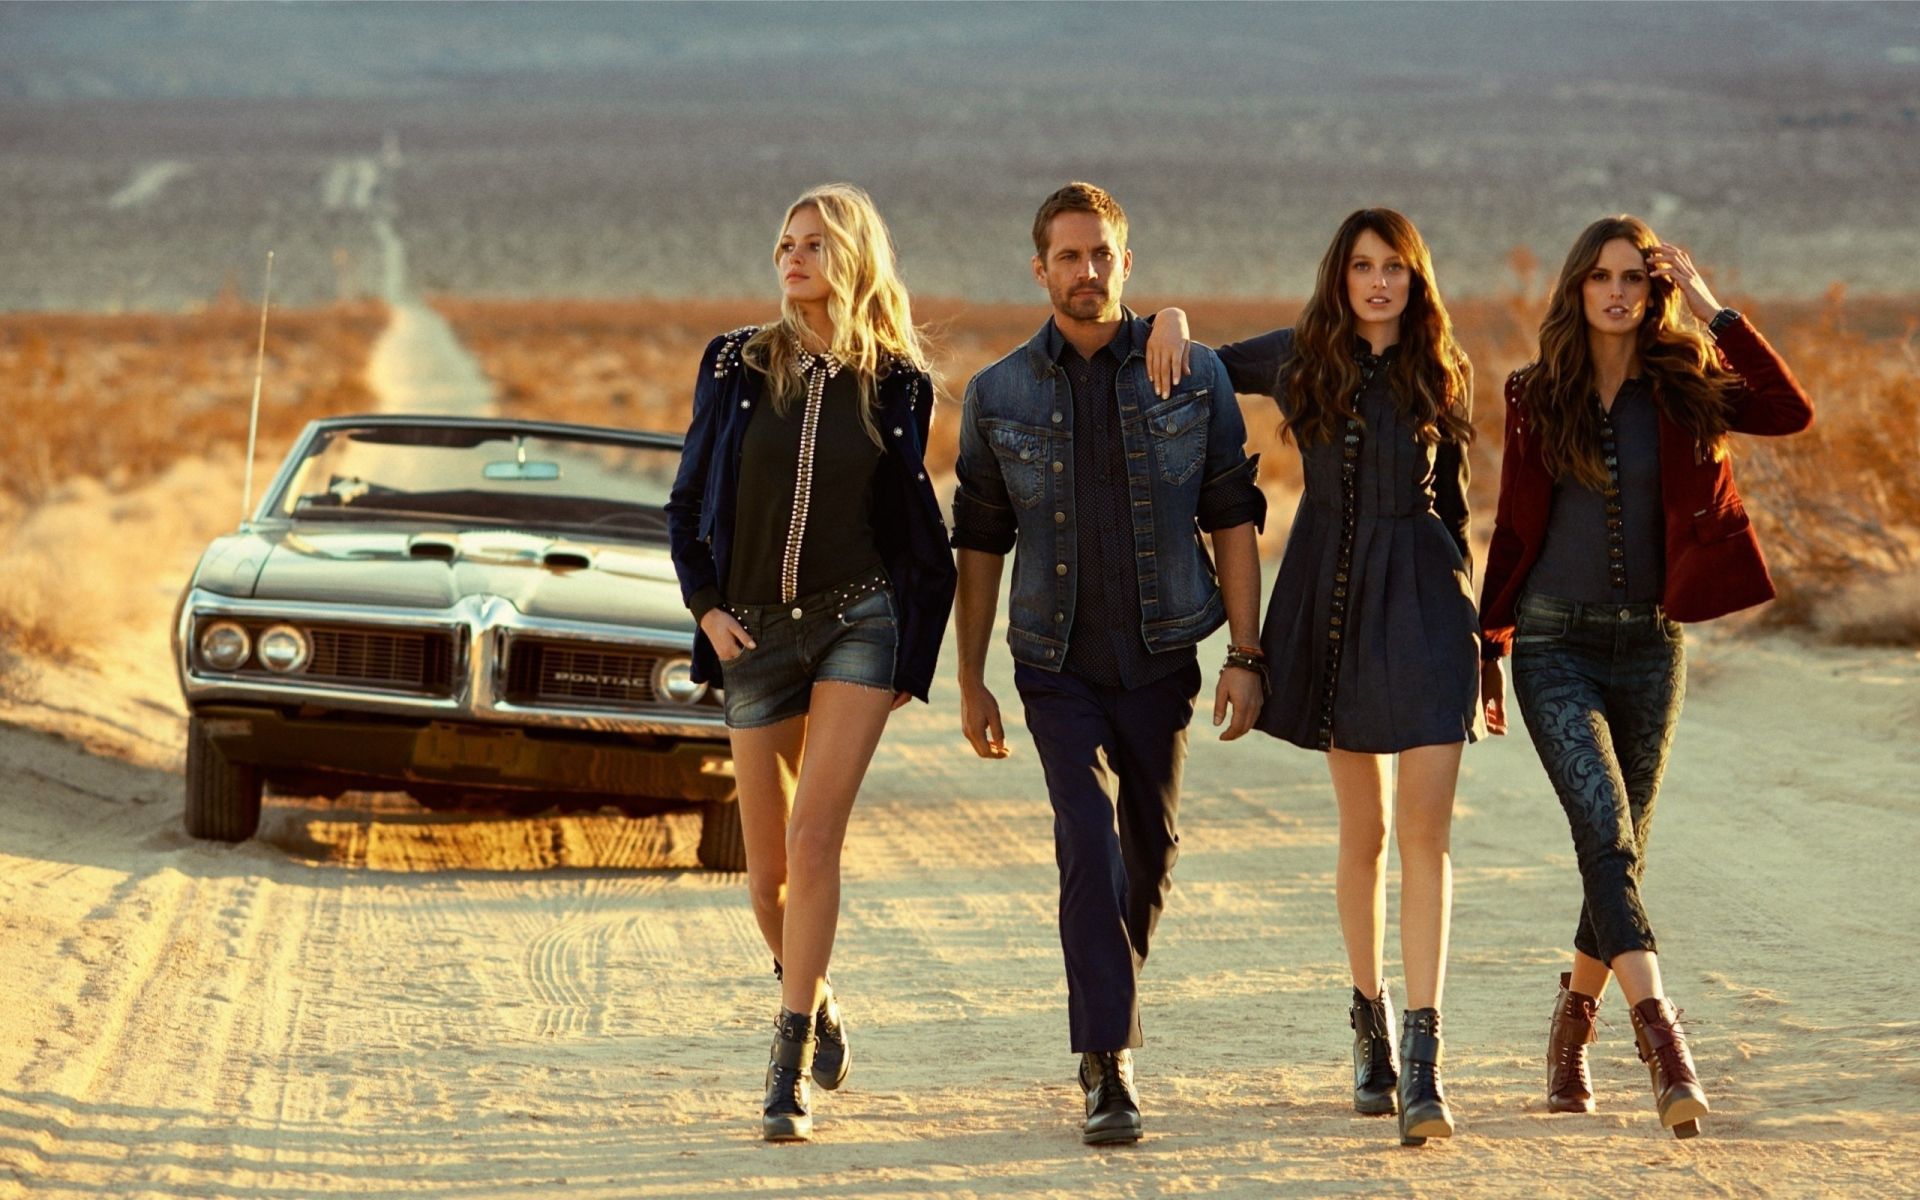 Paul Walker with the girls from the movie Fast and Furious 7